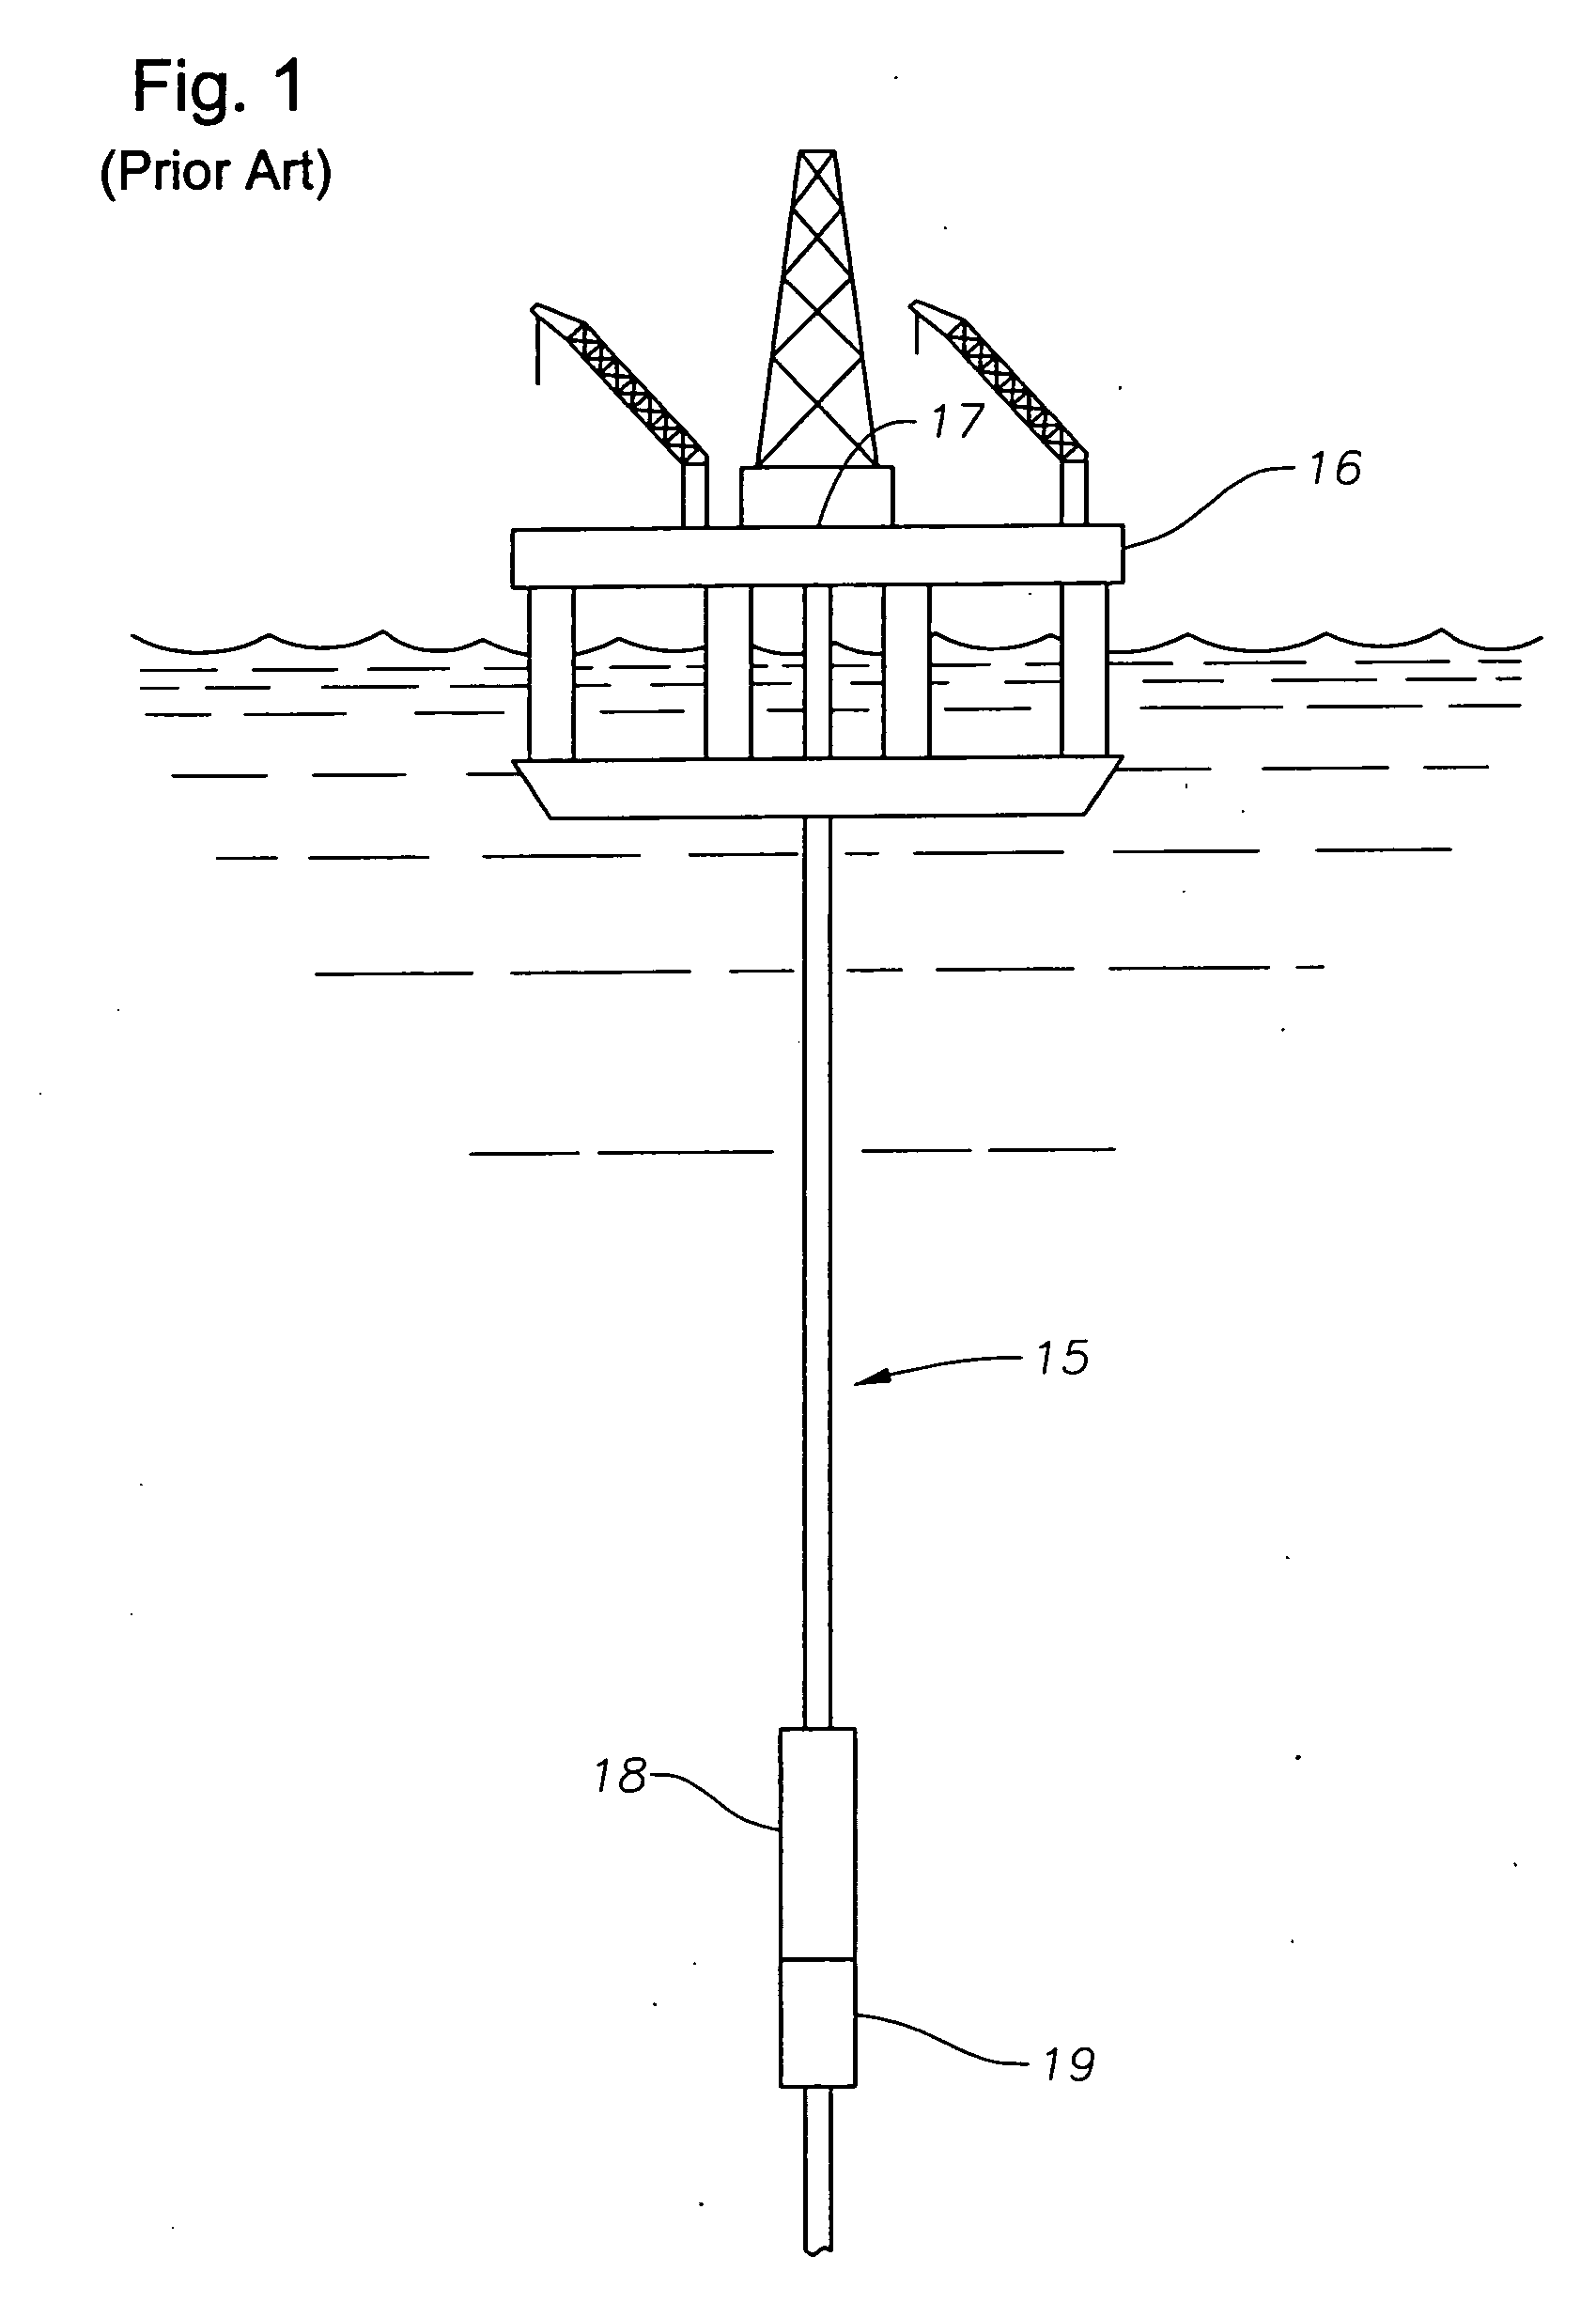 Internal riser inspection device and methods of using same